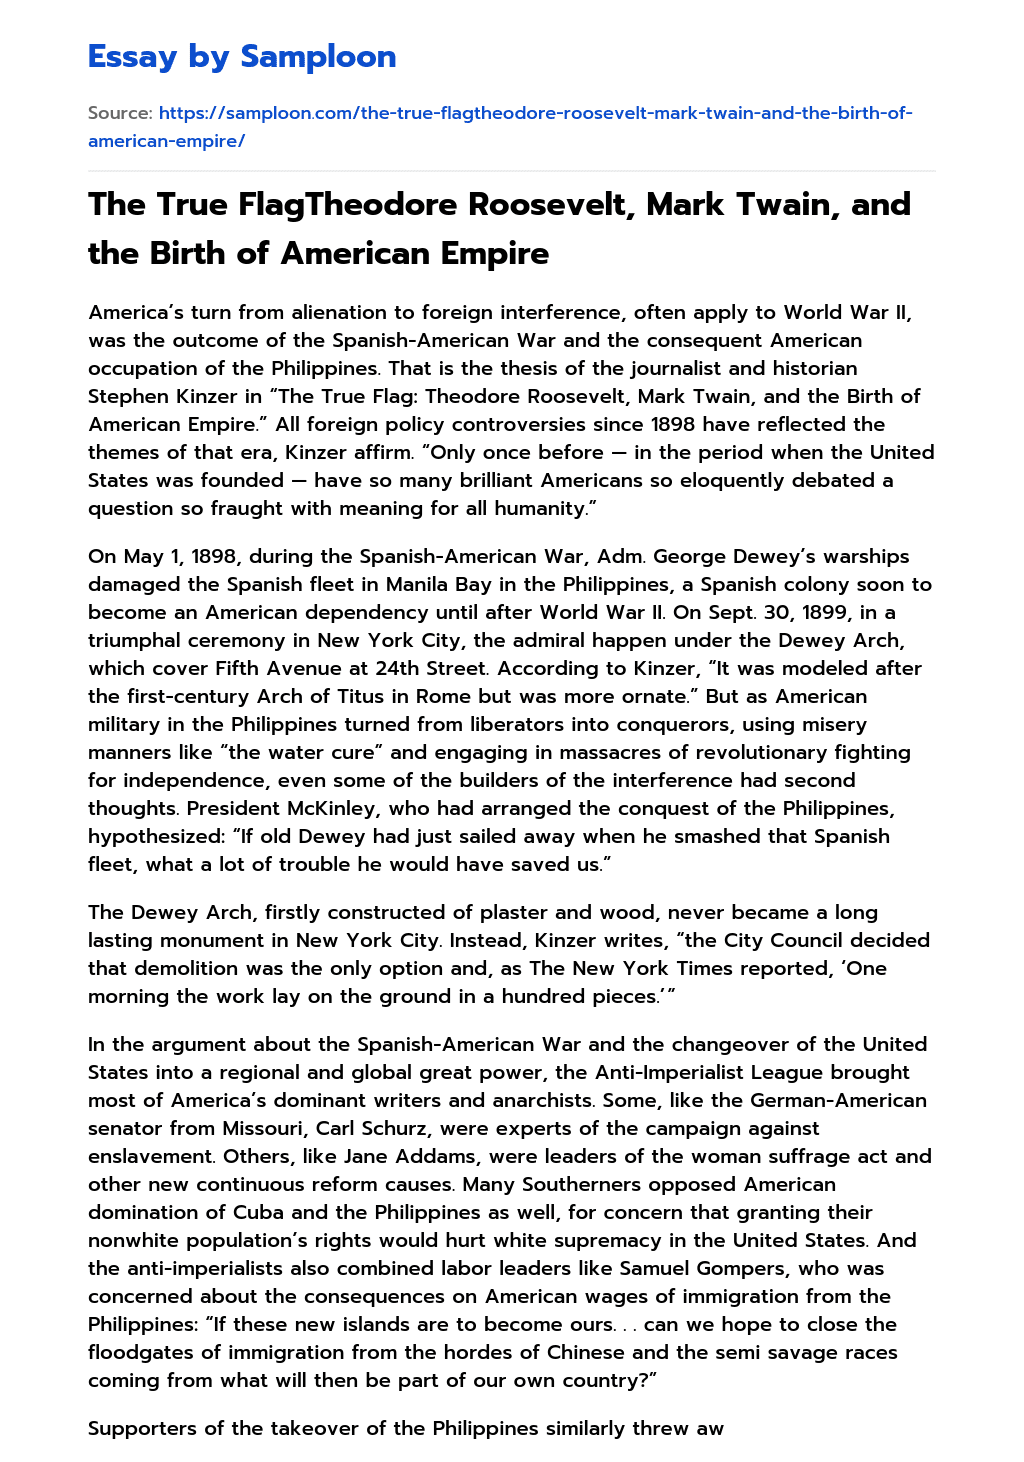 The True FlagTheodore Roosevelt, Mark Twain, and the Birth of American Empire  essay